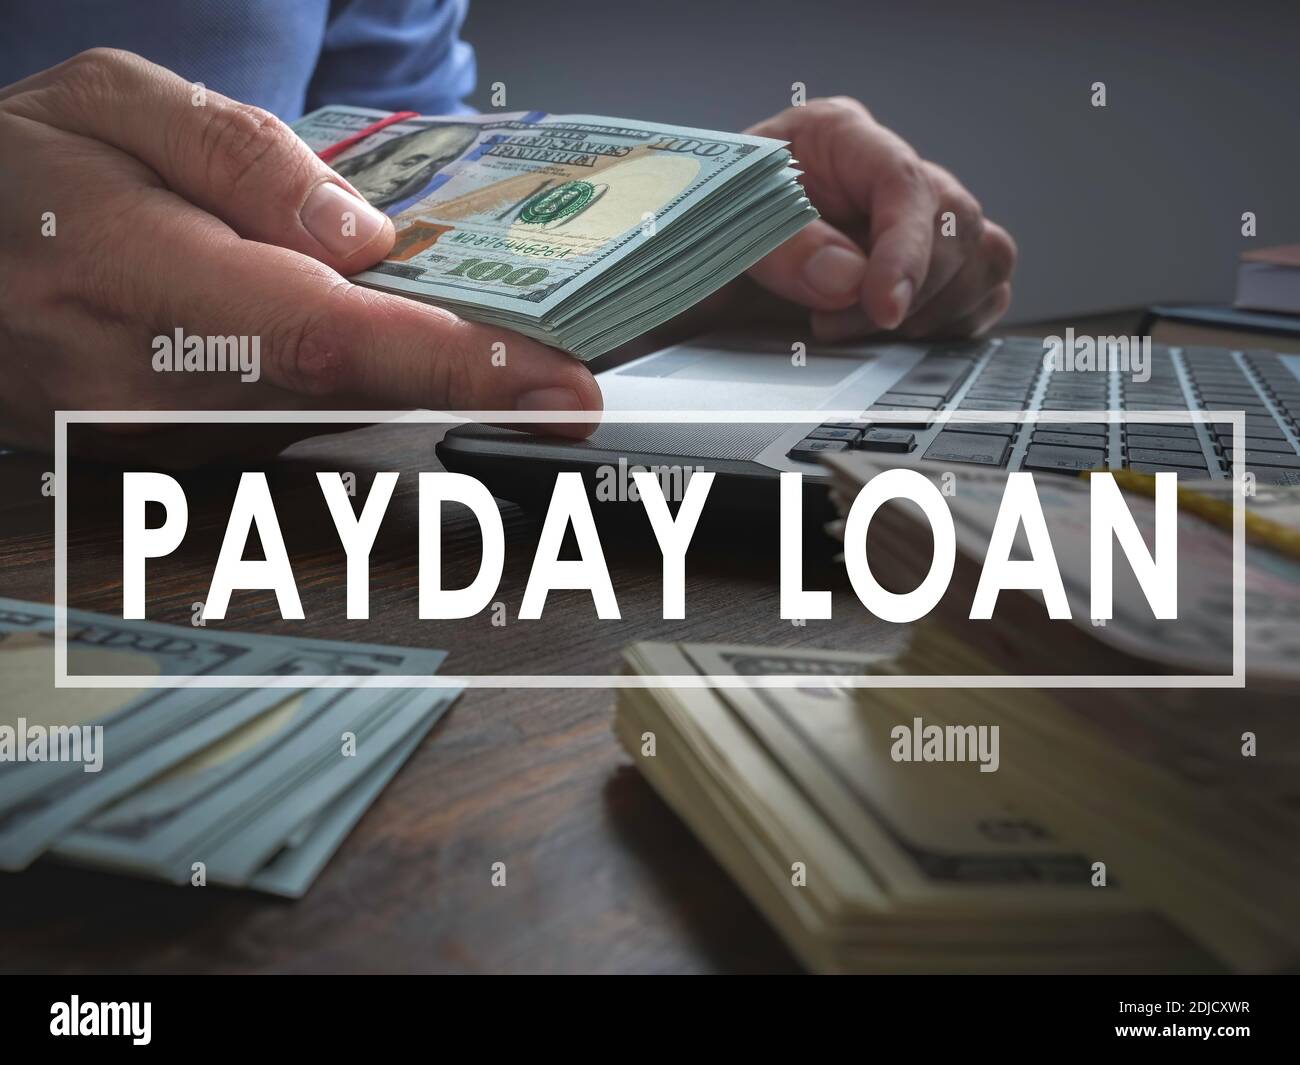 Payday loan concept. The man offers wad of cash. Stock Photo